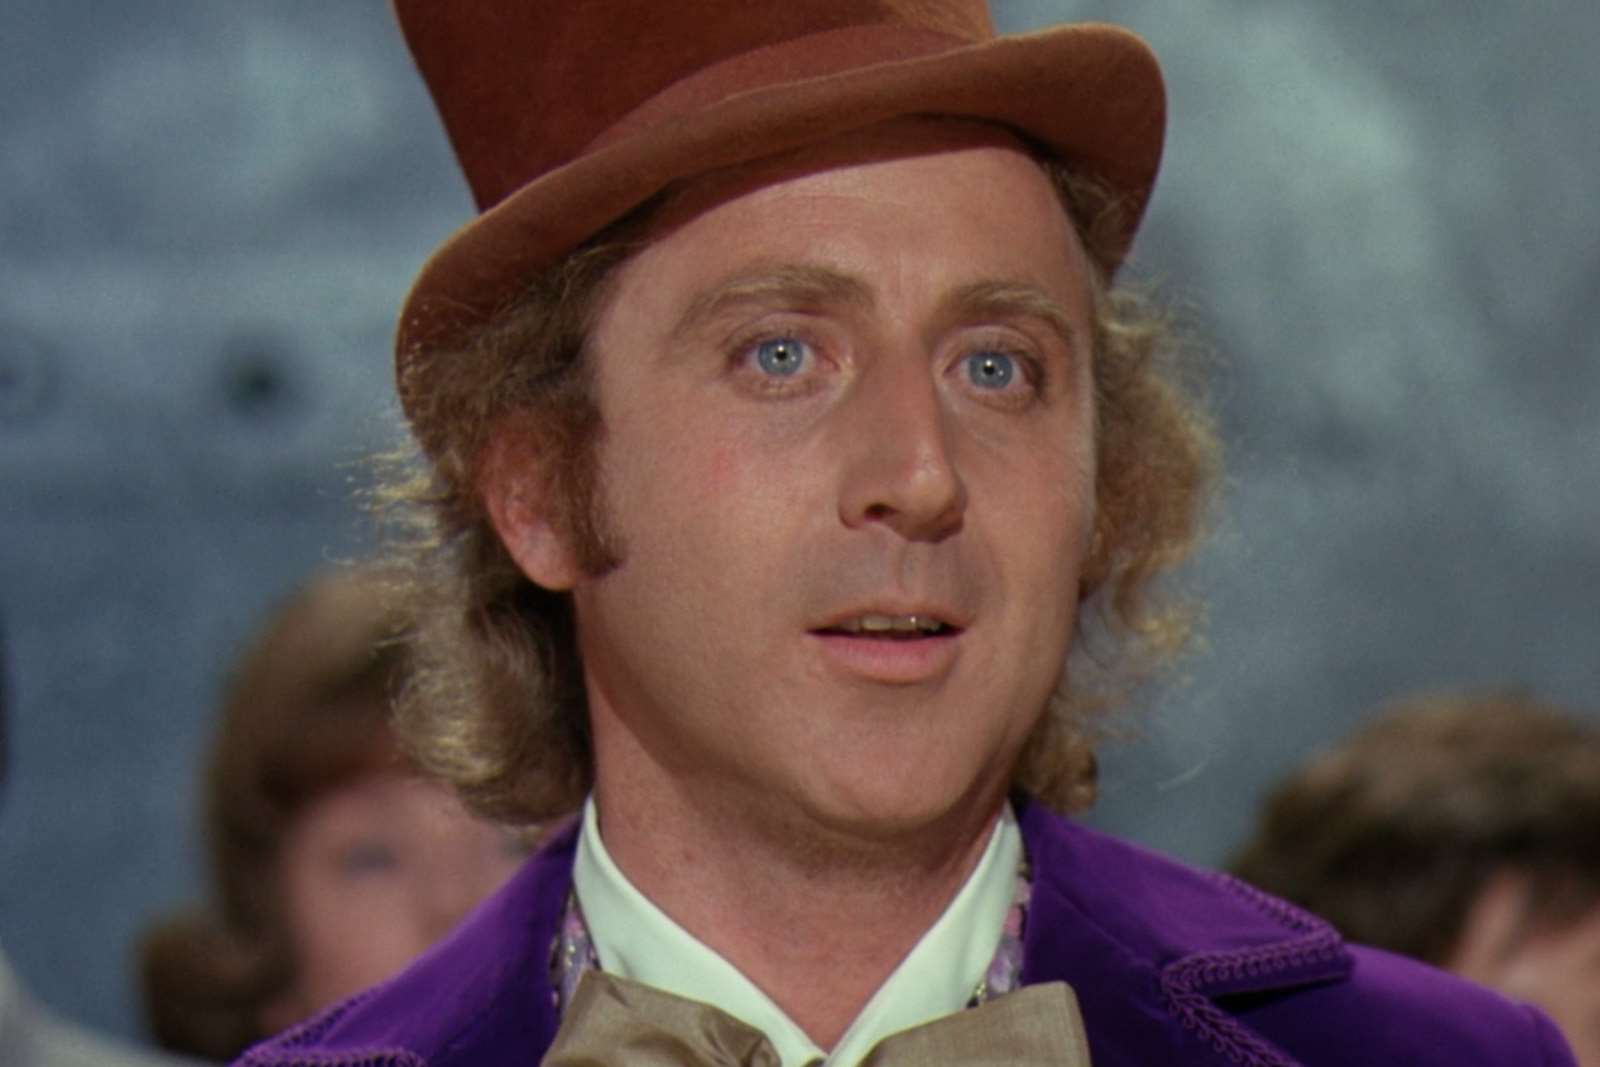 Gene Wilder as Willy Wonka in the 1971 film Picture: Paramount Pictures